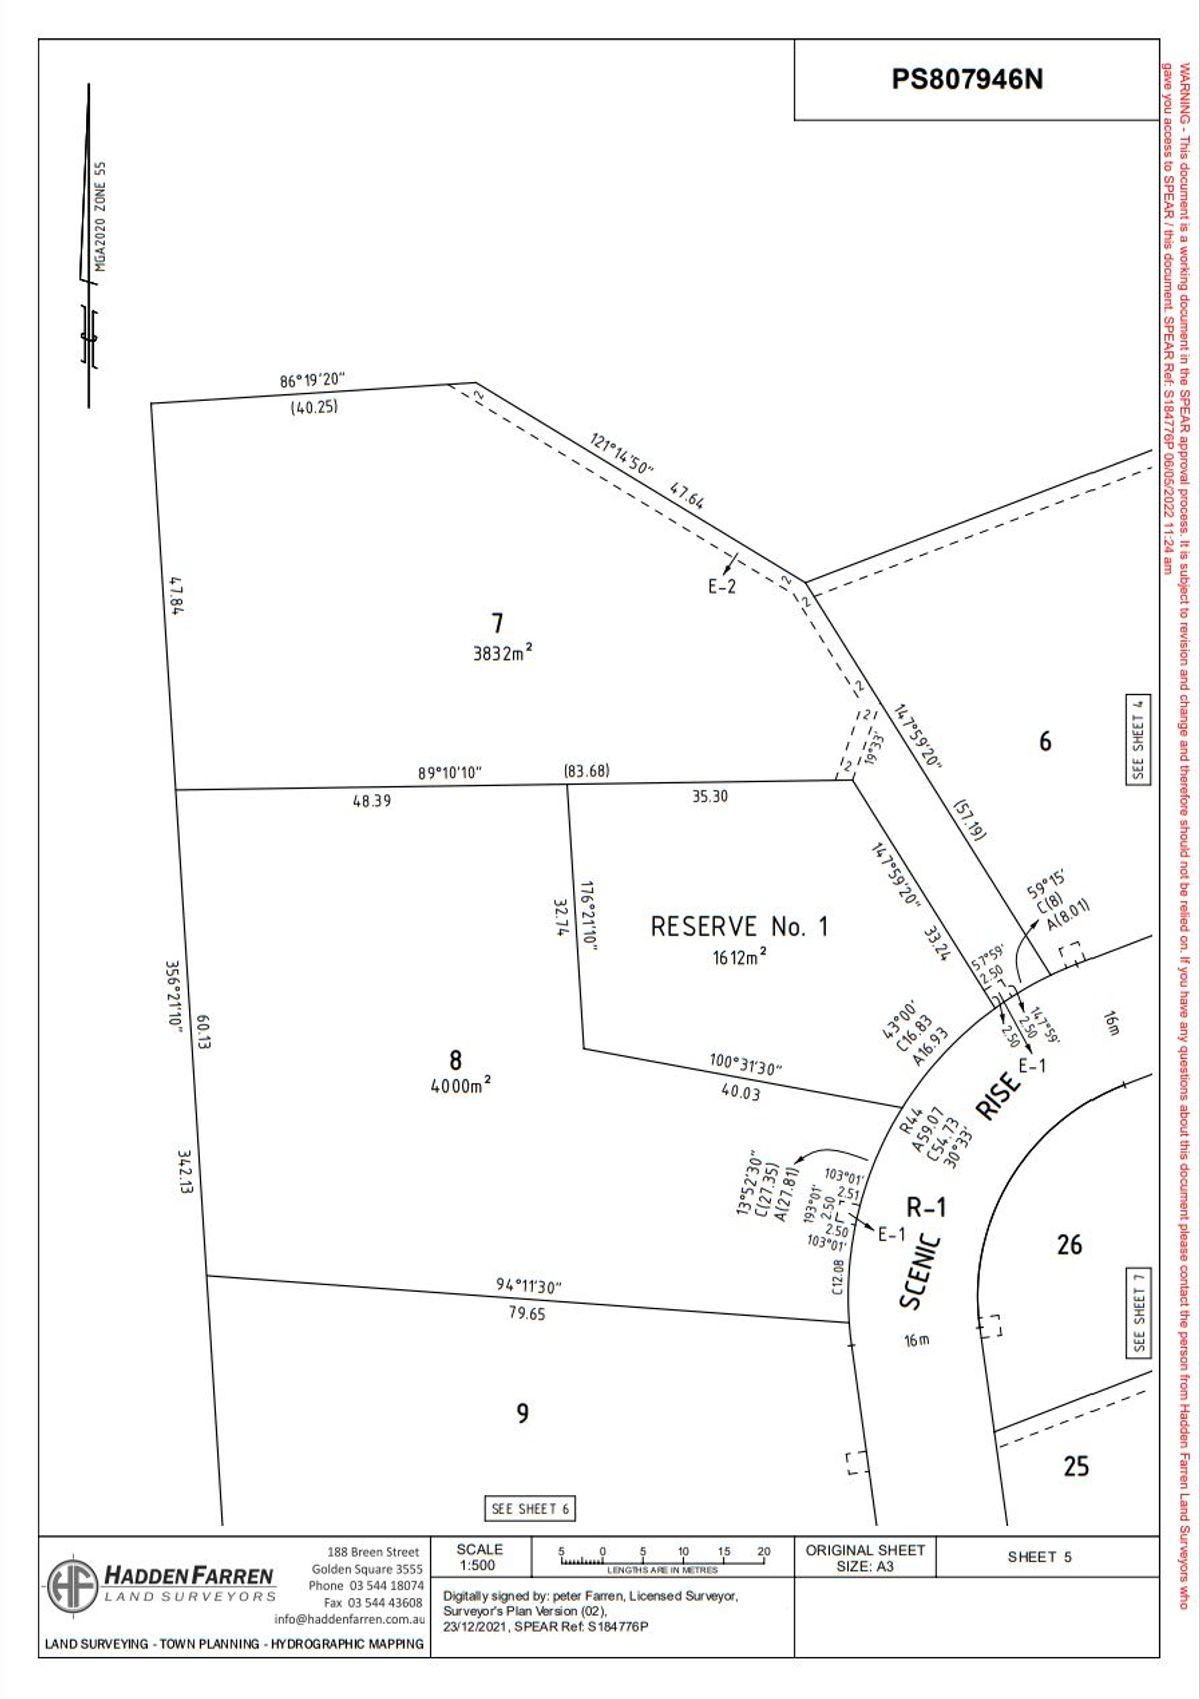 Page 5 Plan of subdivision